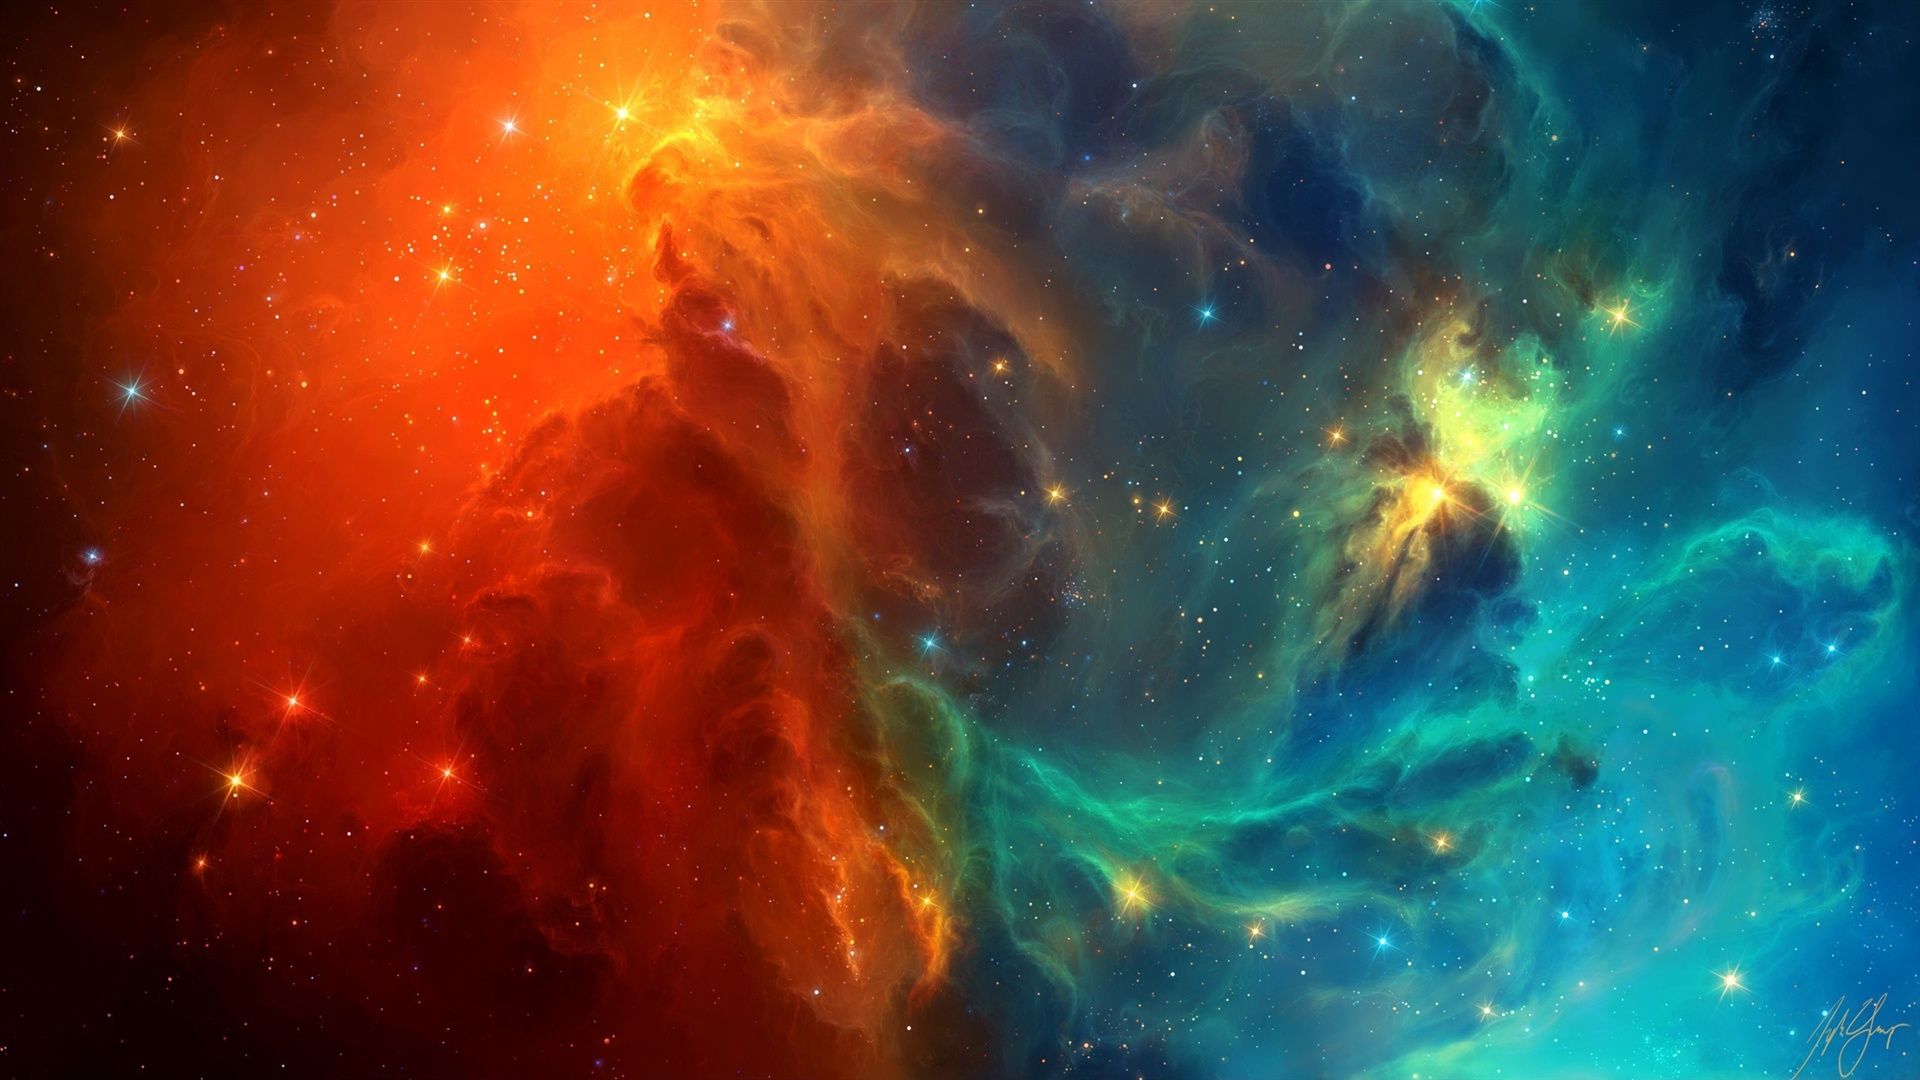 Space nebula, blue and red galaxies Wallpaper | 1920x1080 ...